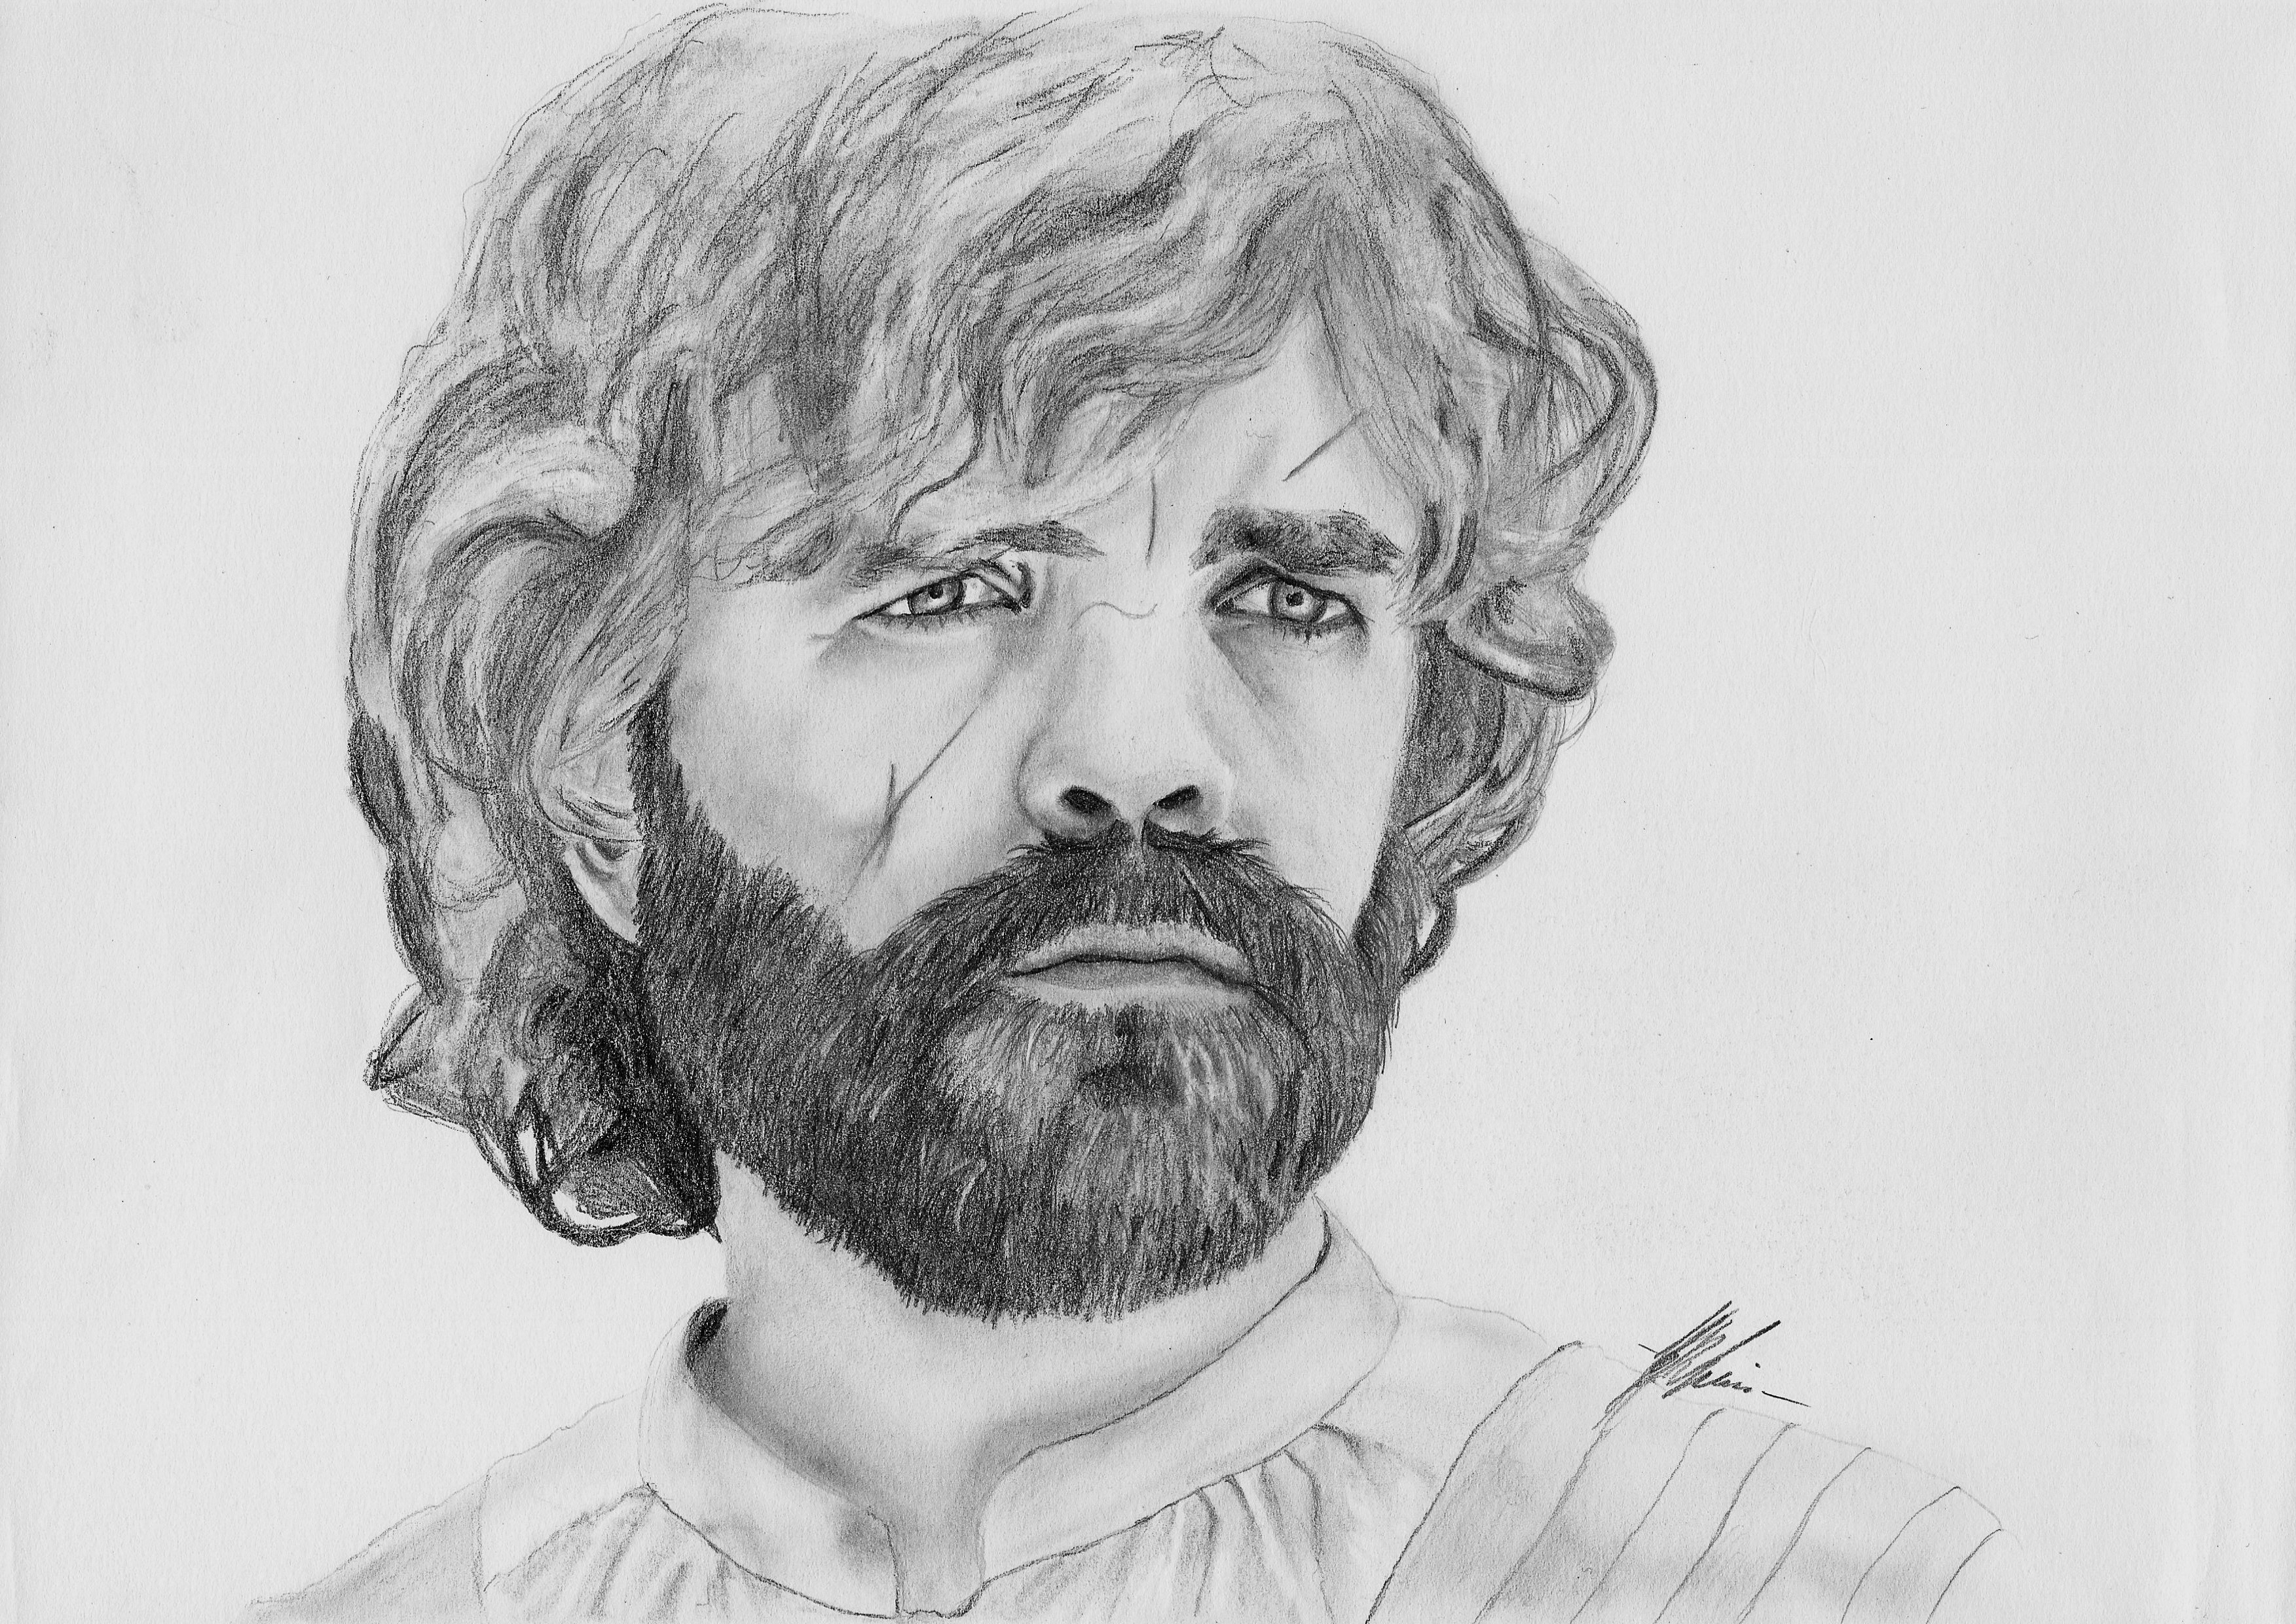 Tyrion Lannister A4.jpg